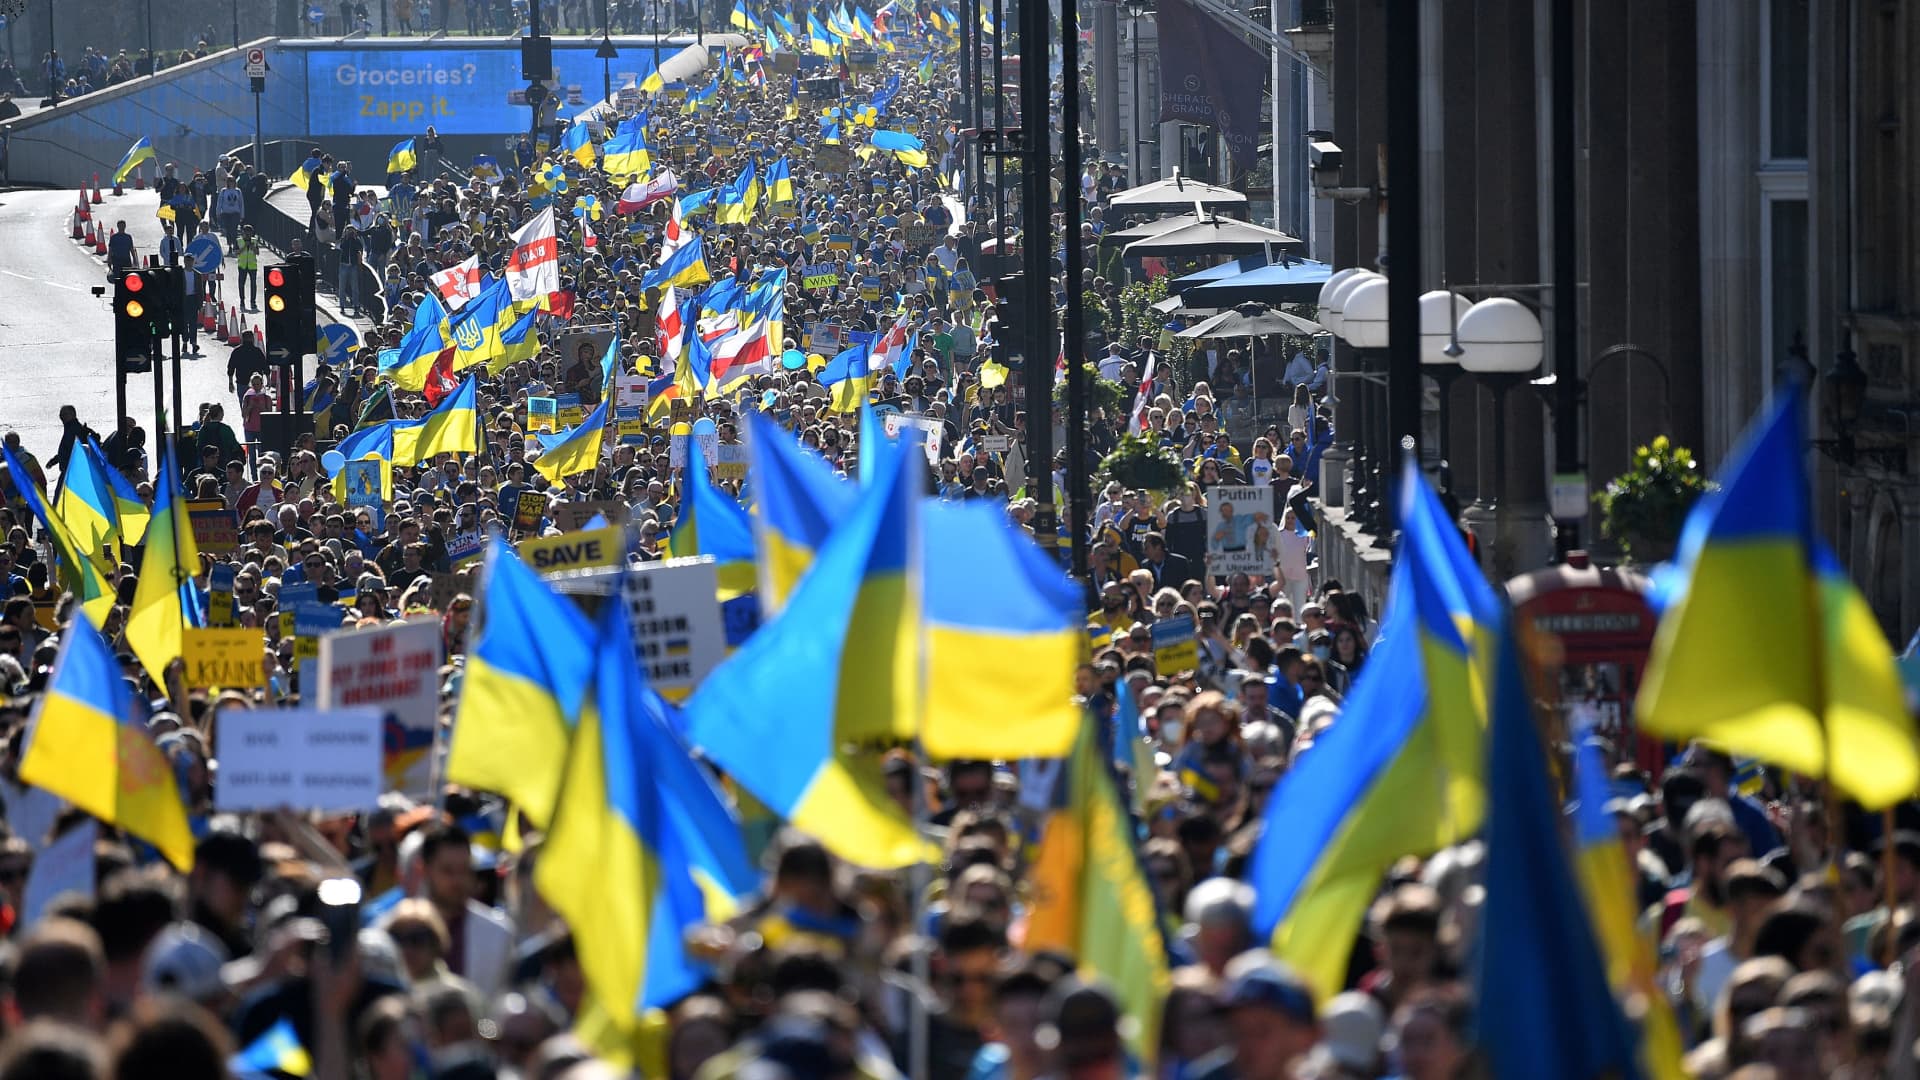 Demonstrators wave Ukrainian national flags during a 'London stands with Ukraine' protest march and vigil, in central London, on March 26, 2022 to send a unified message of support to the Ukrainian people. 